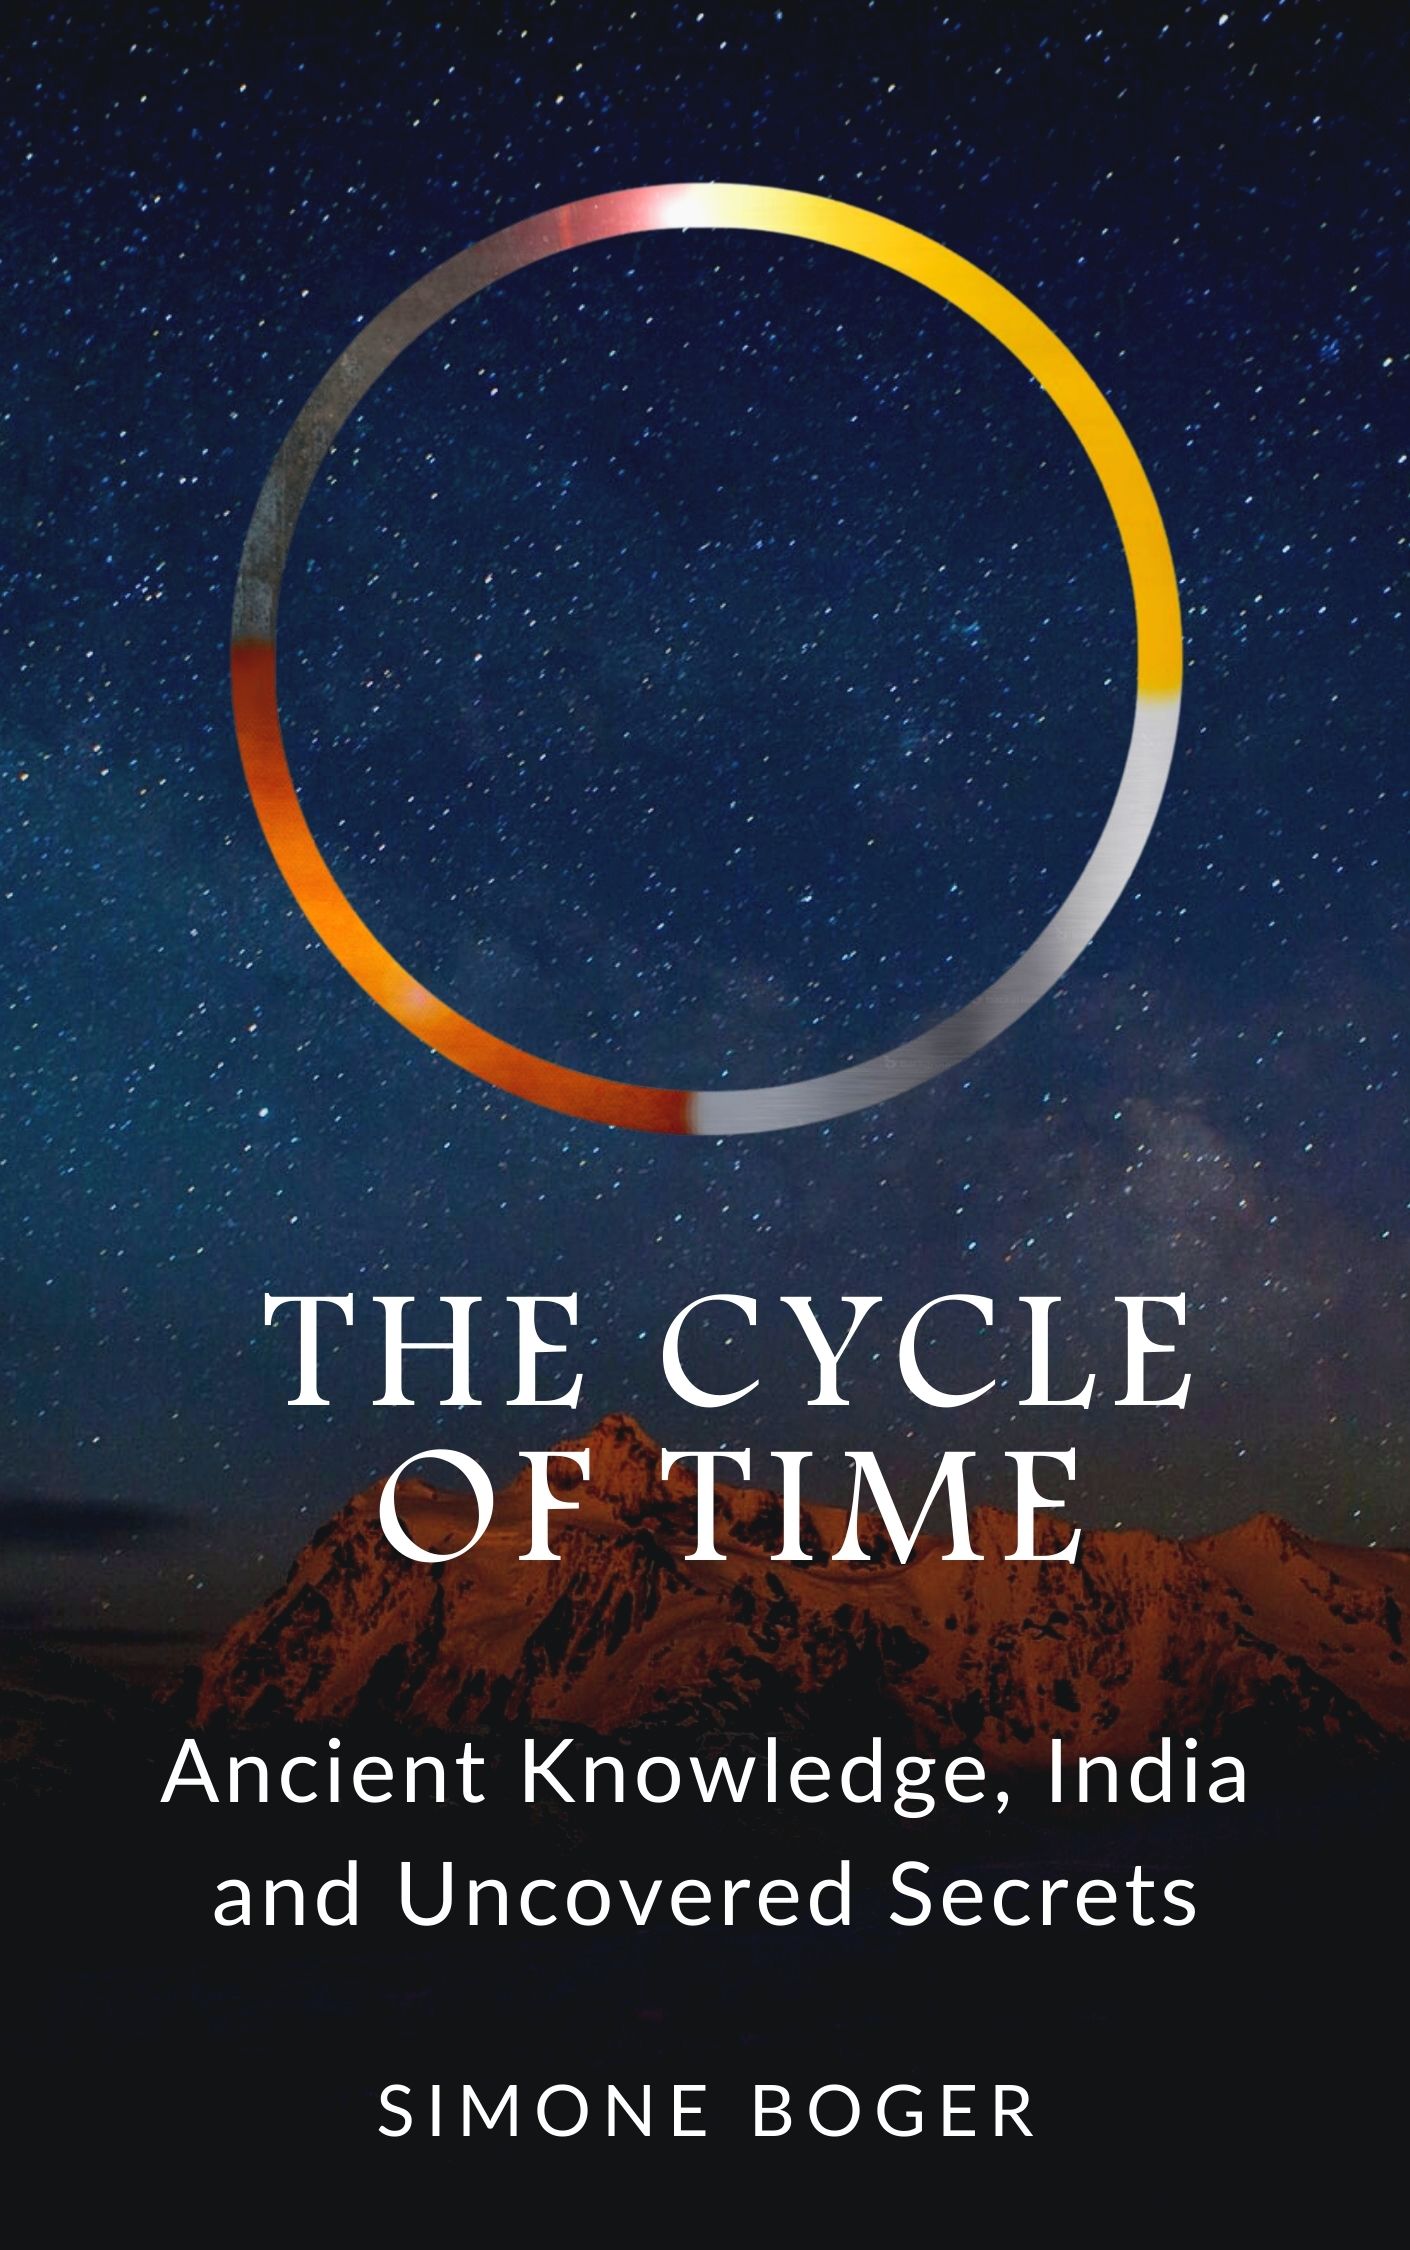 New cover the cycle of time